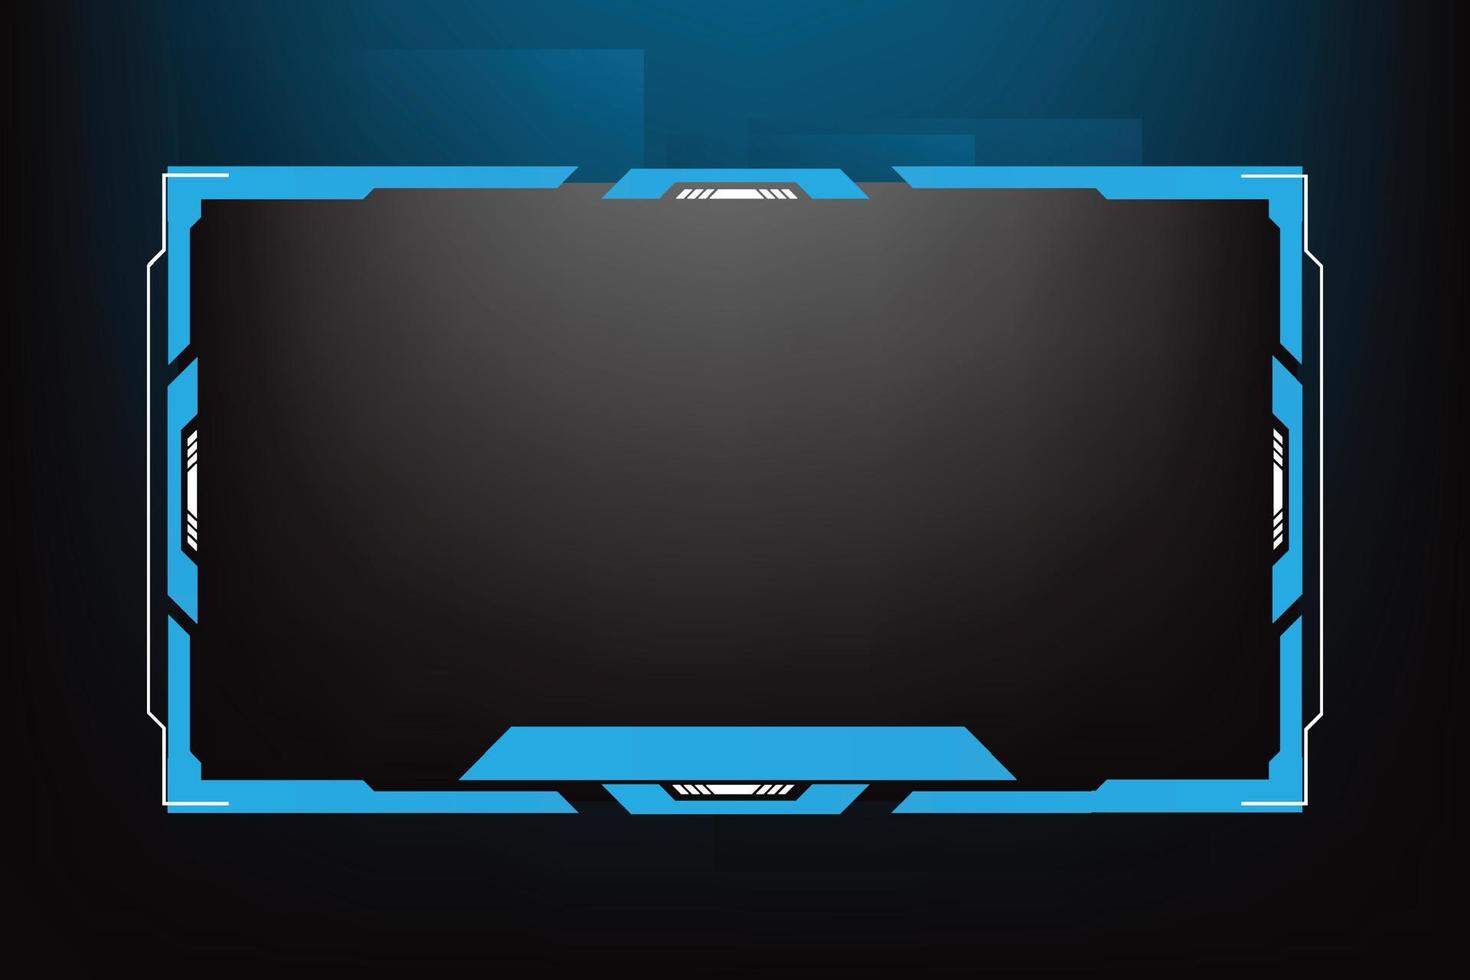 Online gaming overlay layout vector with blue colors. Broadcast screen panel decoration with online buttons on a dark background. Screen interface and frame border design for live gamers.